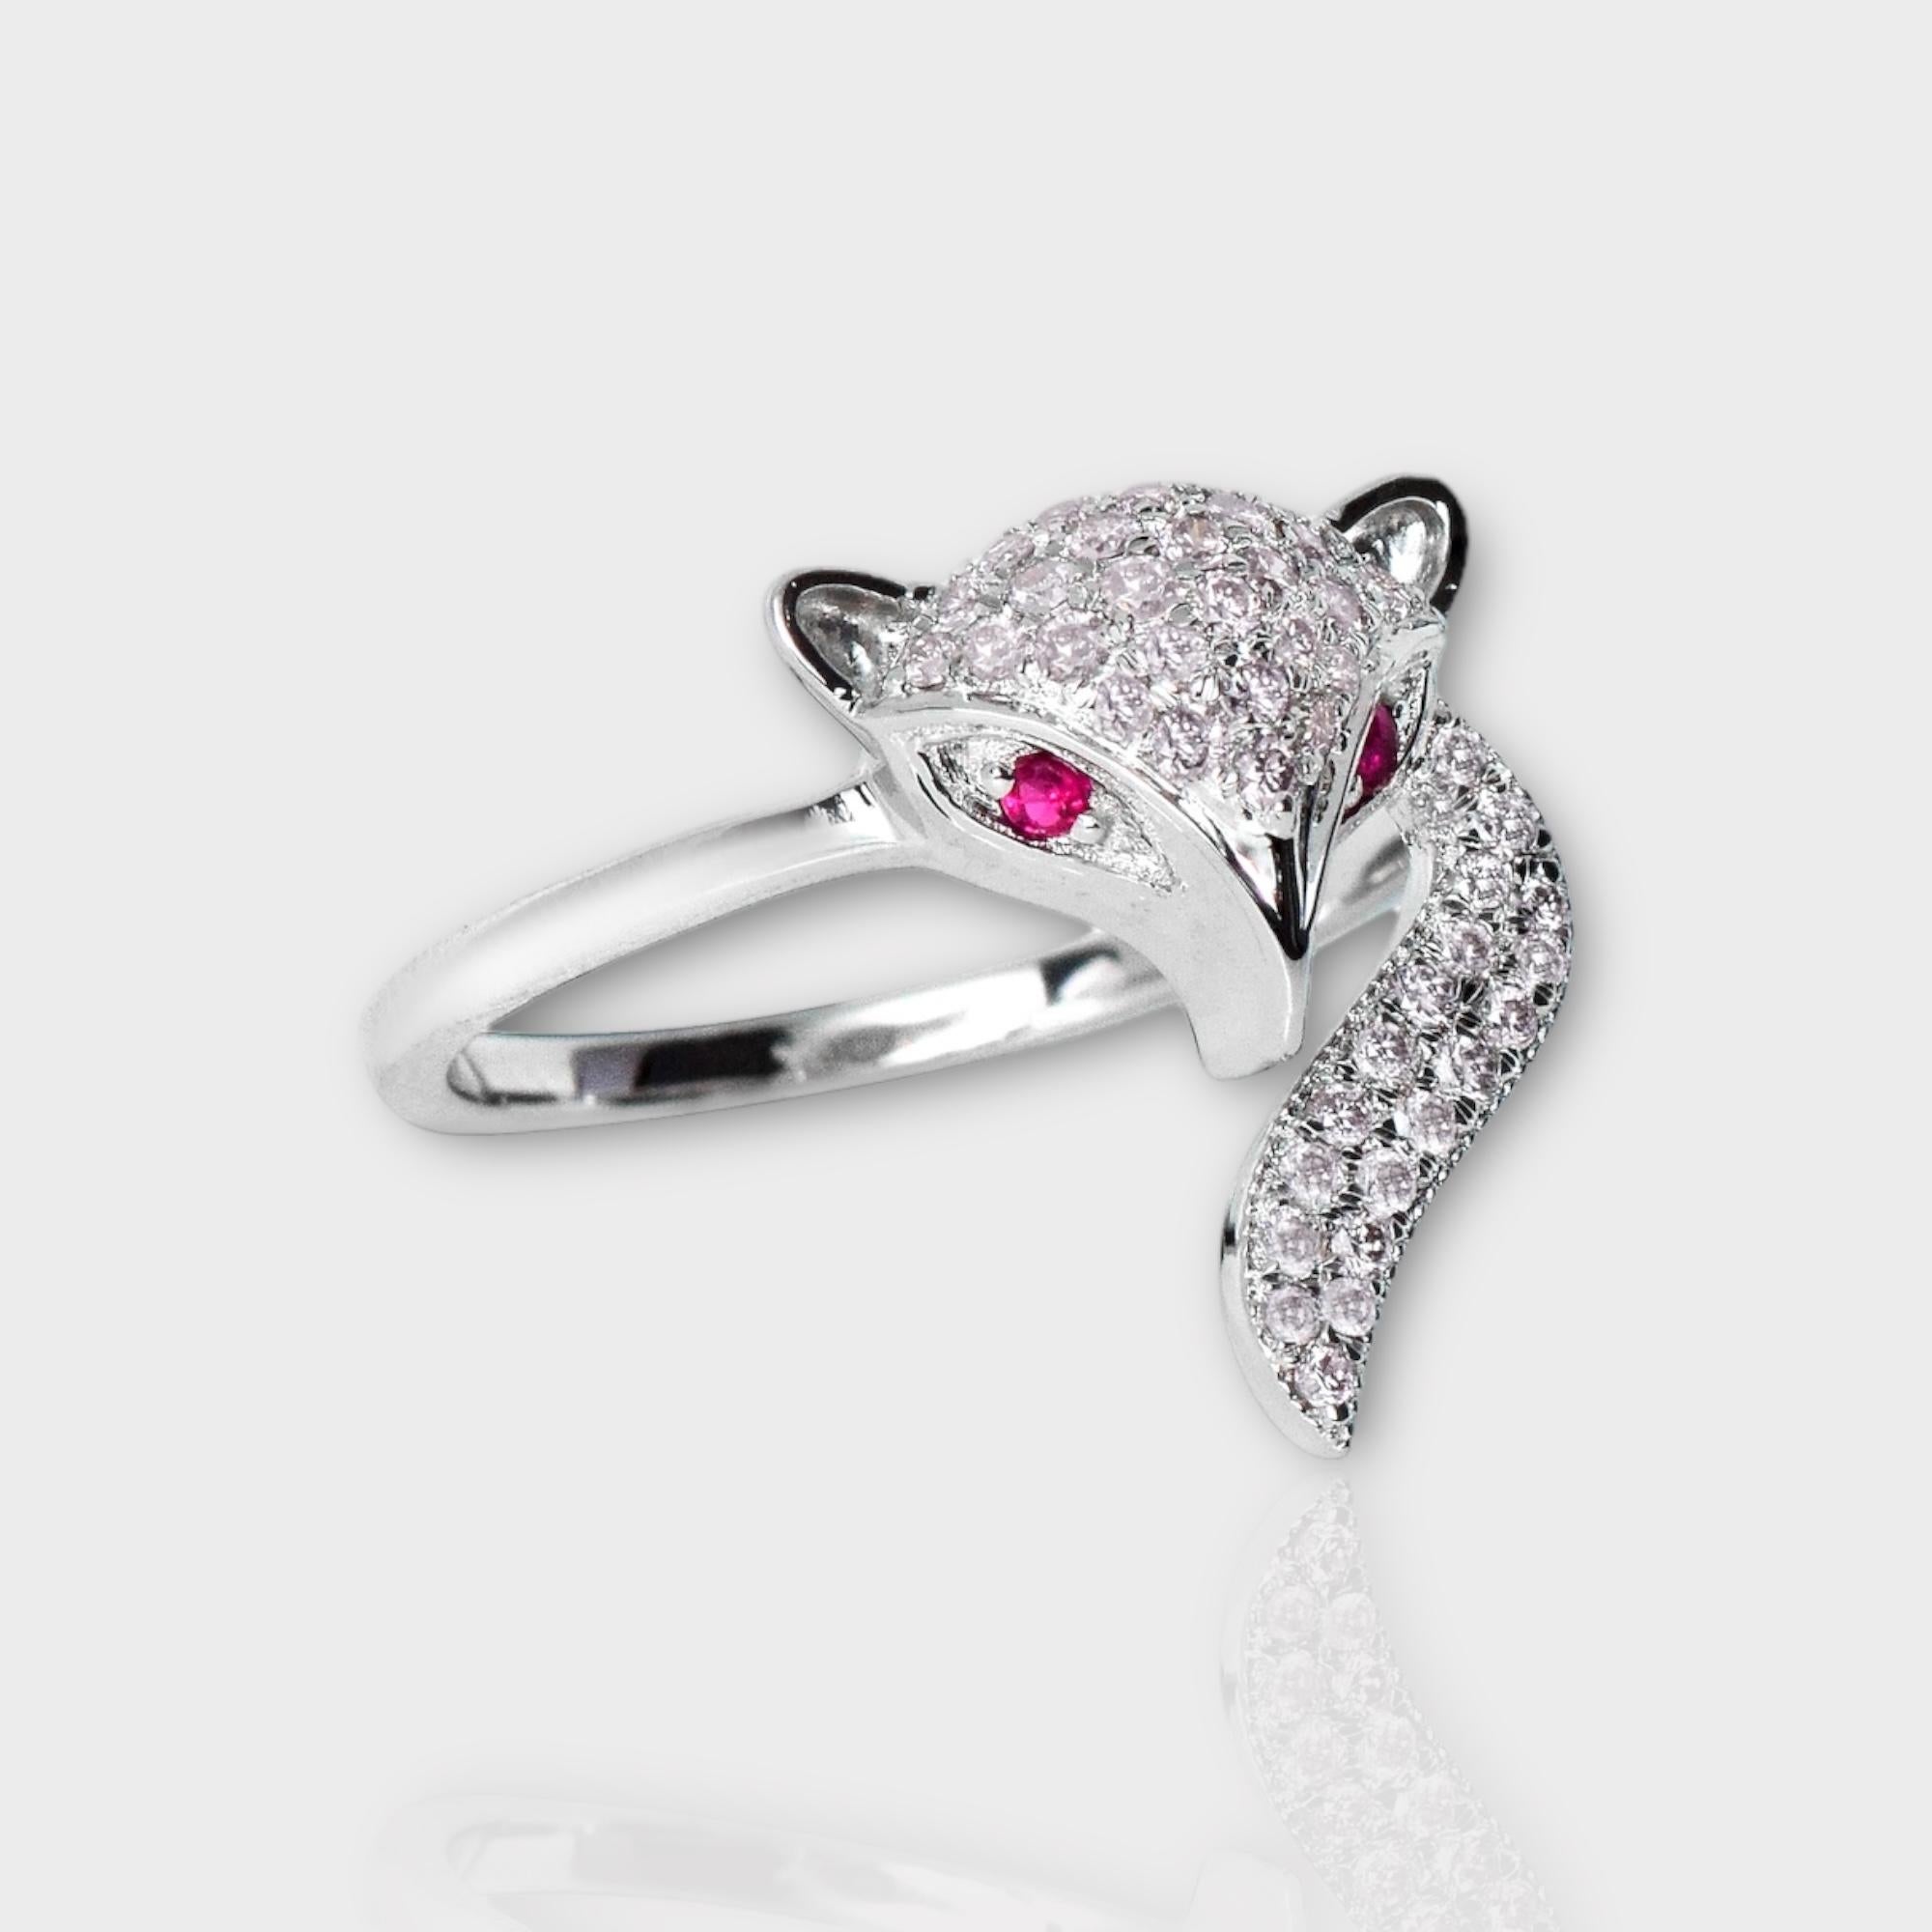 IGI 14K 0.32 ct Natural Pink Diamonds Fox Design Antique Art Deco Ring In New Condition For Sale In Kaohsiung City, TW